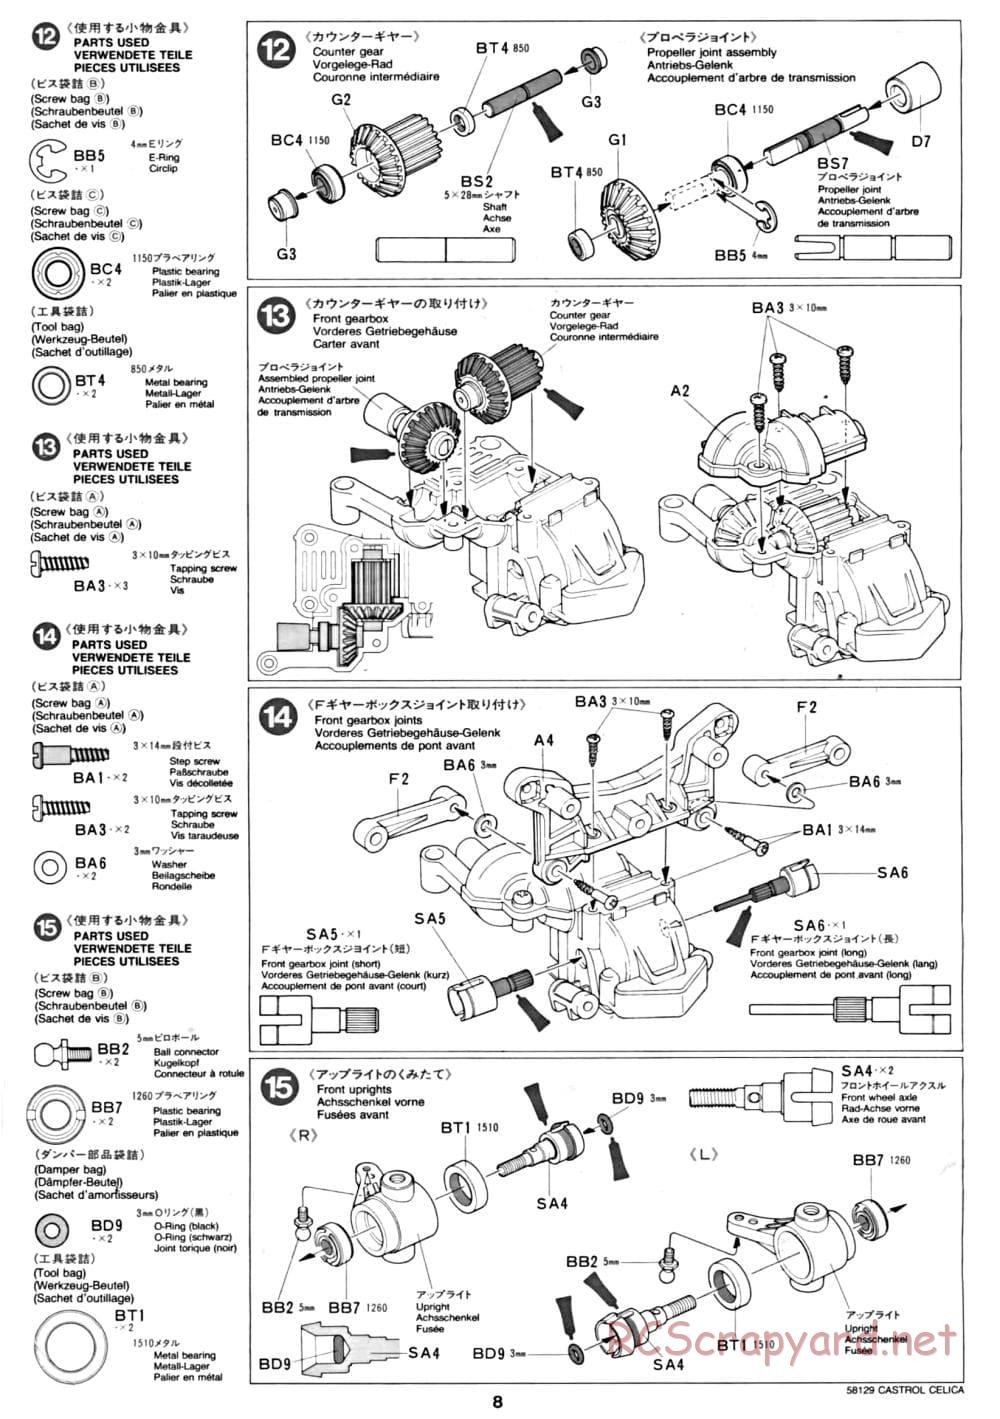 Tamiya - Castrol Celica 93 Monte-Carlo - TA-02 Chassis - Manual - Page 8